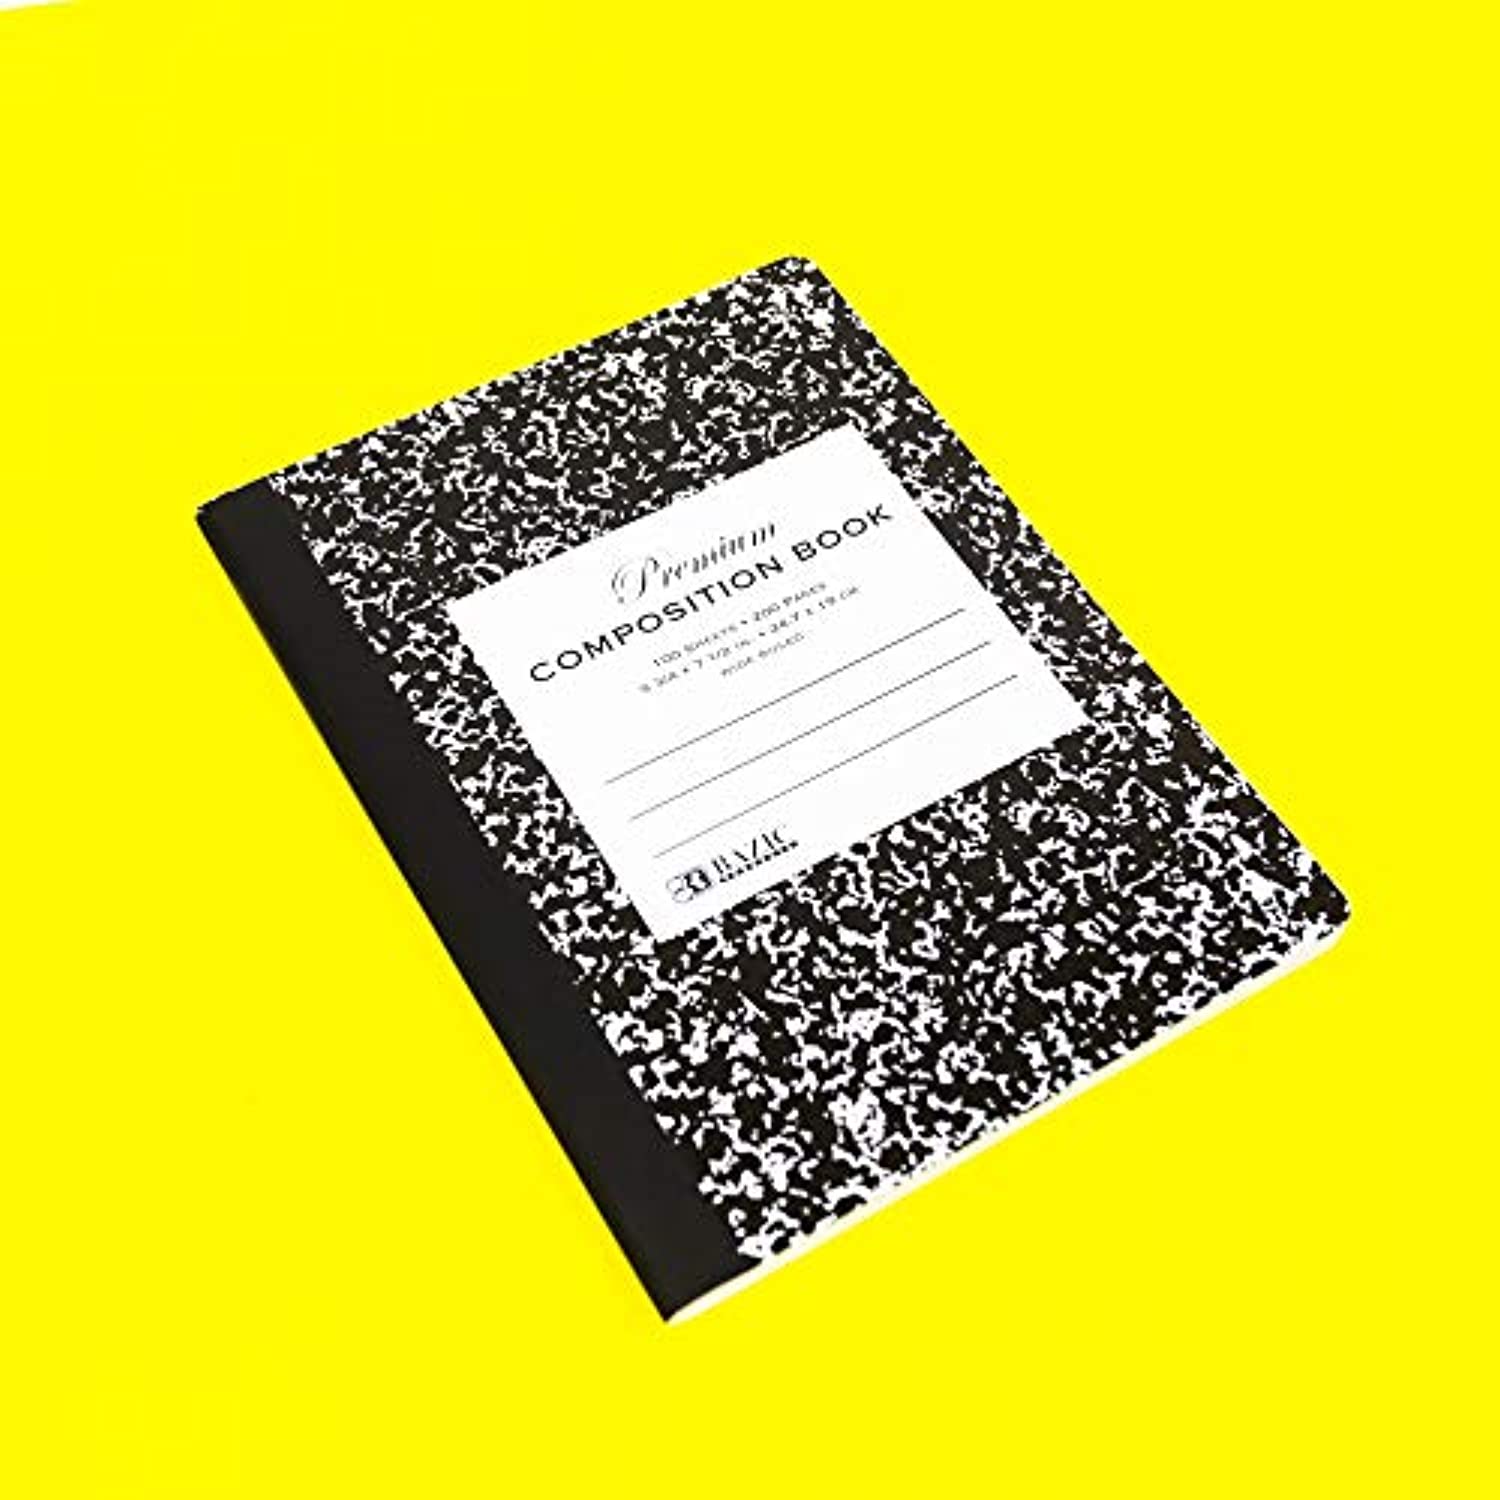 Composition Book W/R 100 Ct. 9 3/4 x 7 1/2 in. | Flex Black Marble Cover.